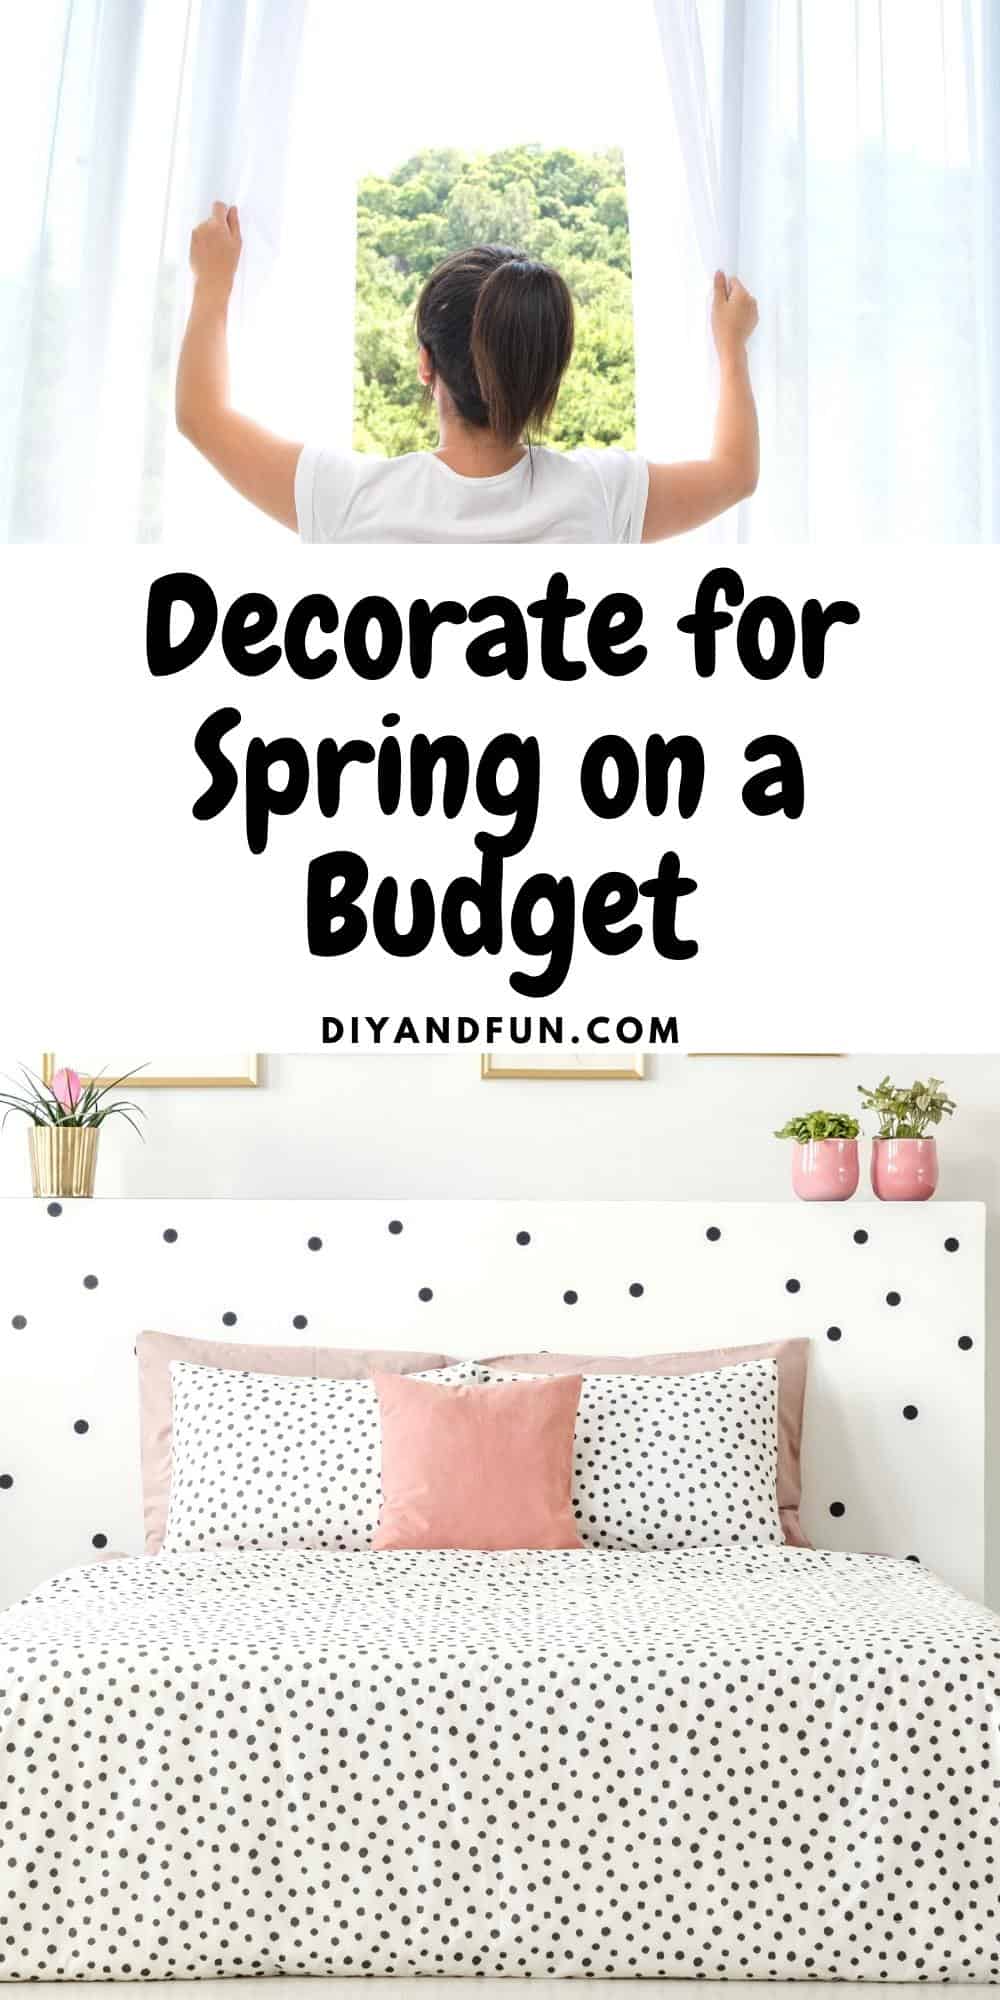 Decorate for Spring on a Budget, inexpensive ways that your can update your home or apartment for the spring season.